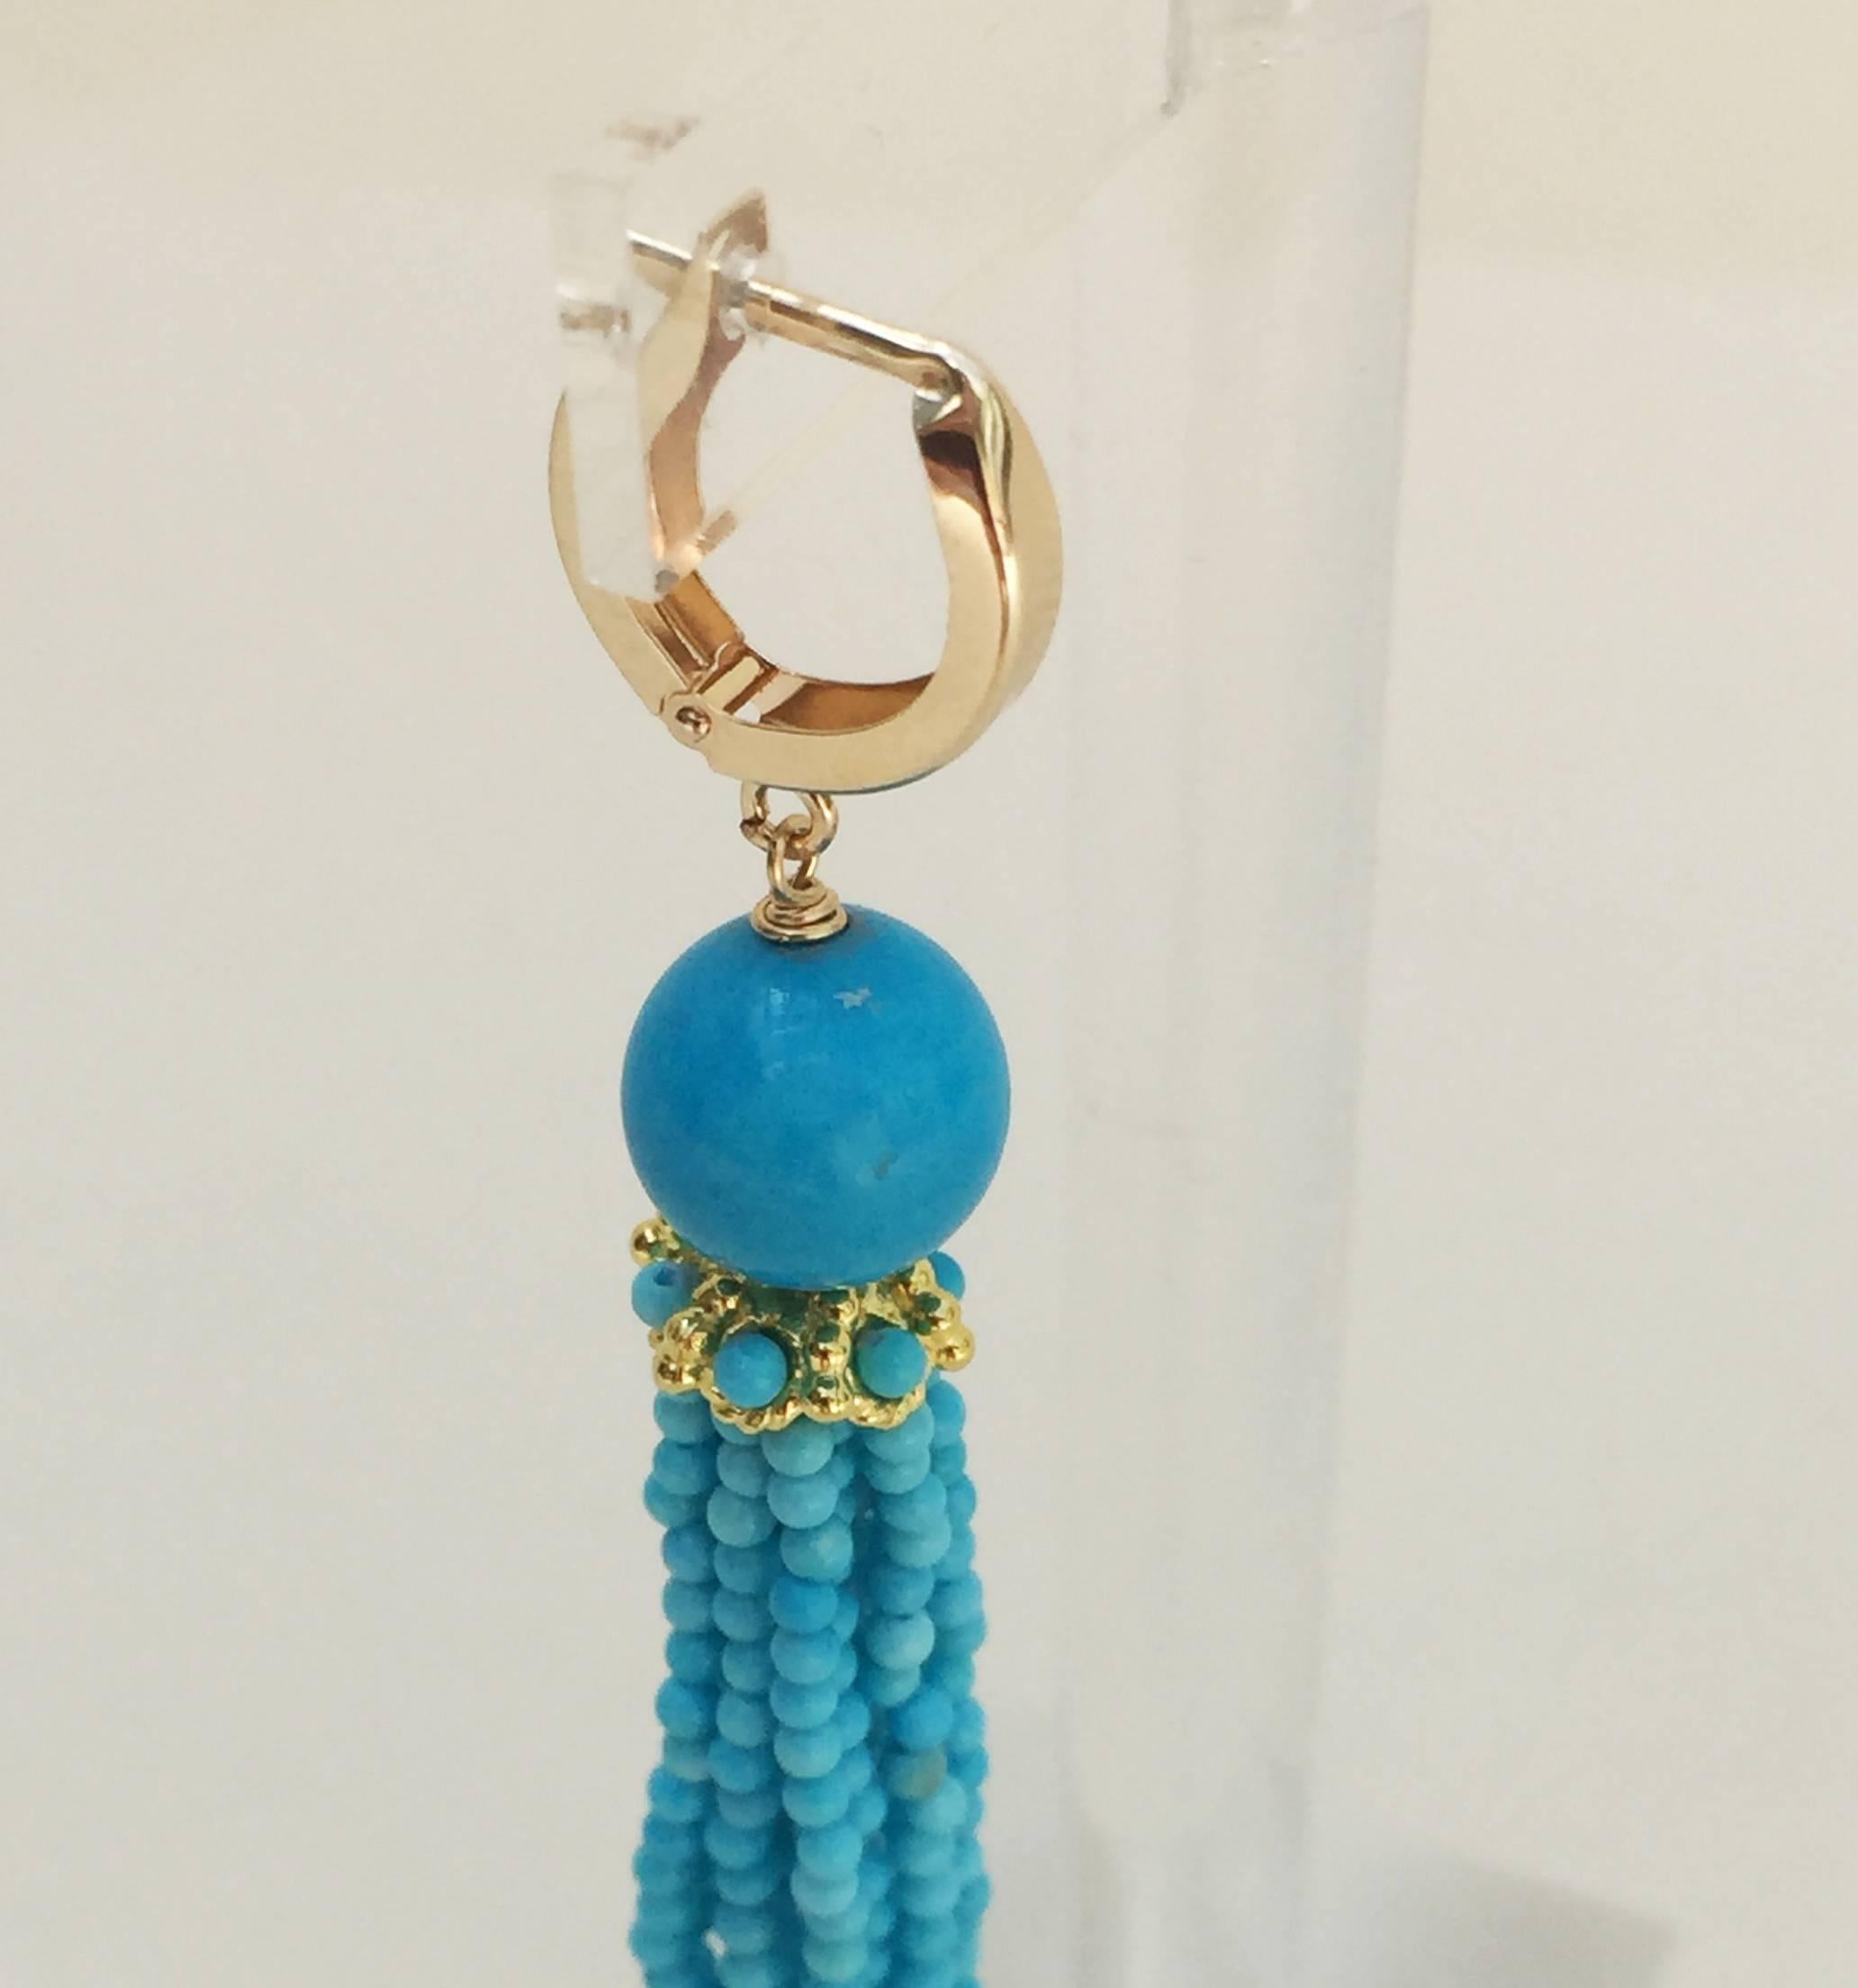 Artist Marina J Turquoise Tassel Earrings with 14 K Gold Cup and Lever Back